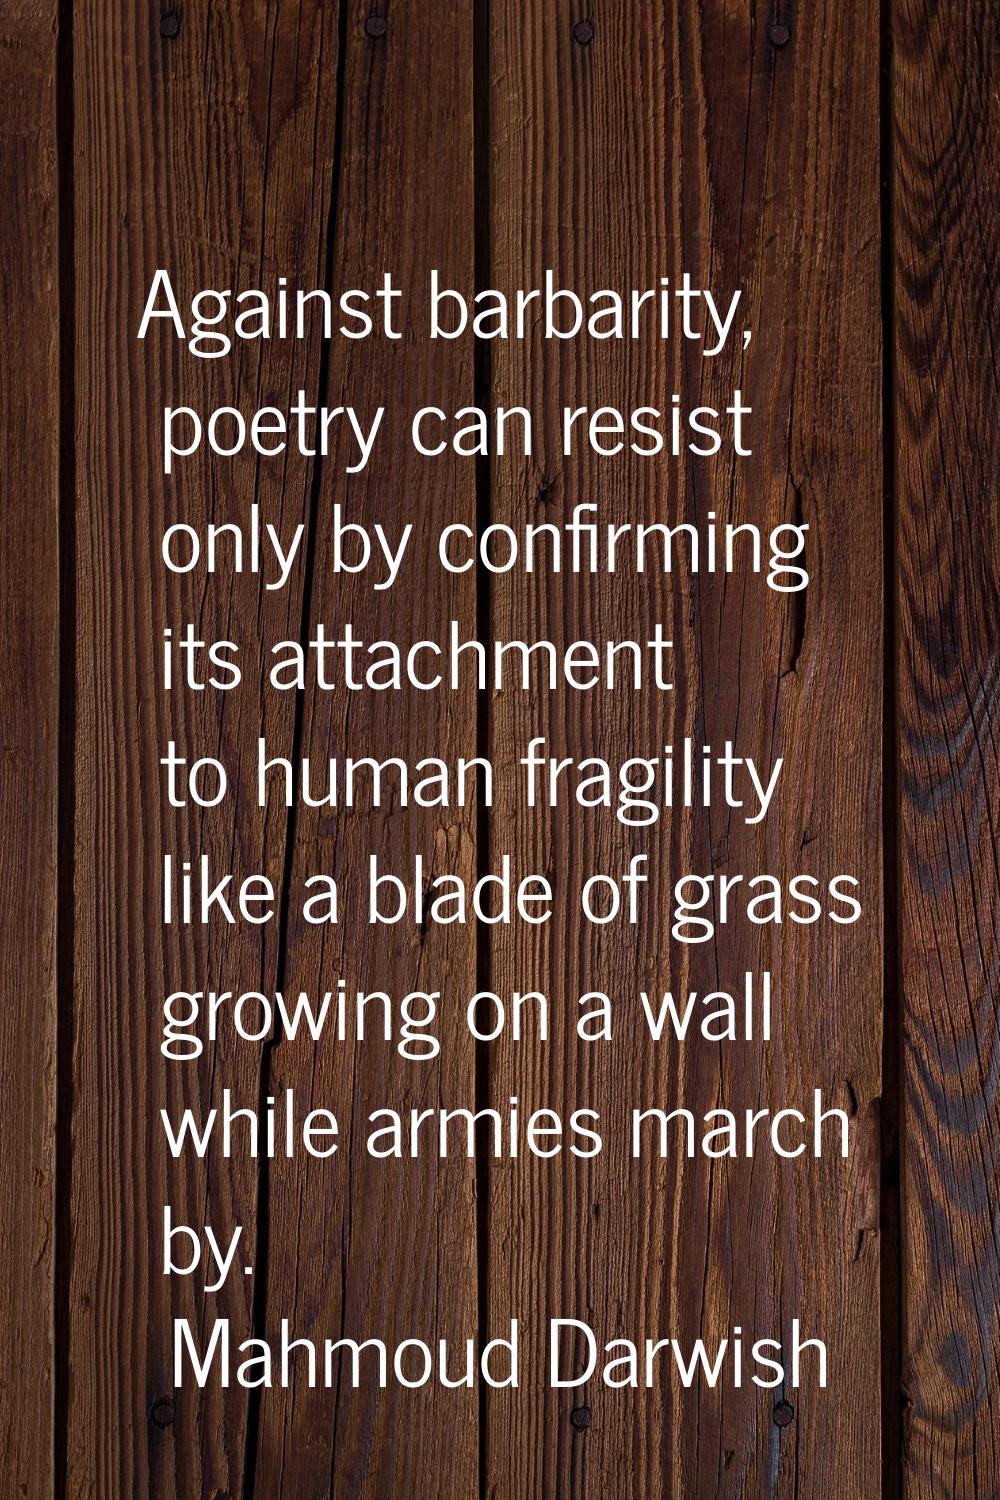 Against barbarity, poetry can resist only by confirming its attachment to human fragility like a bl